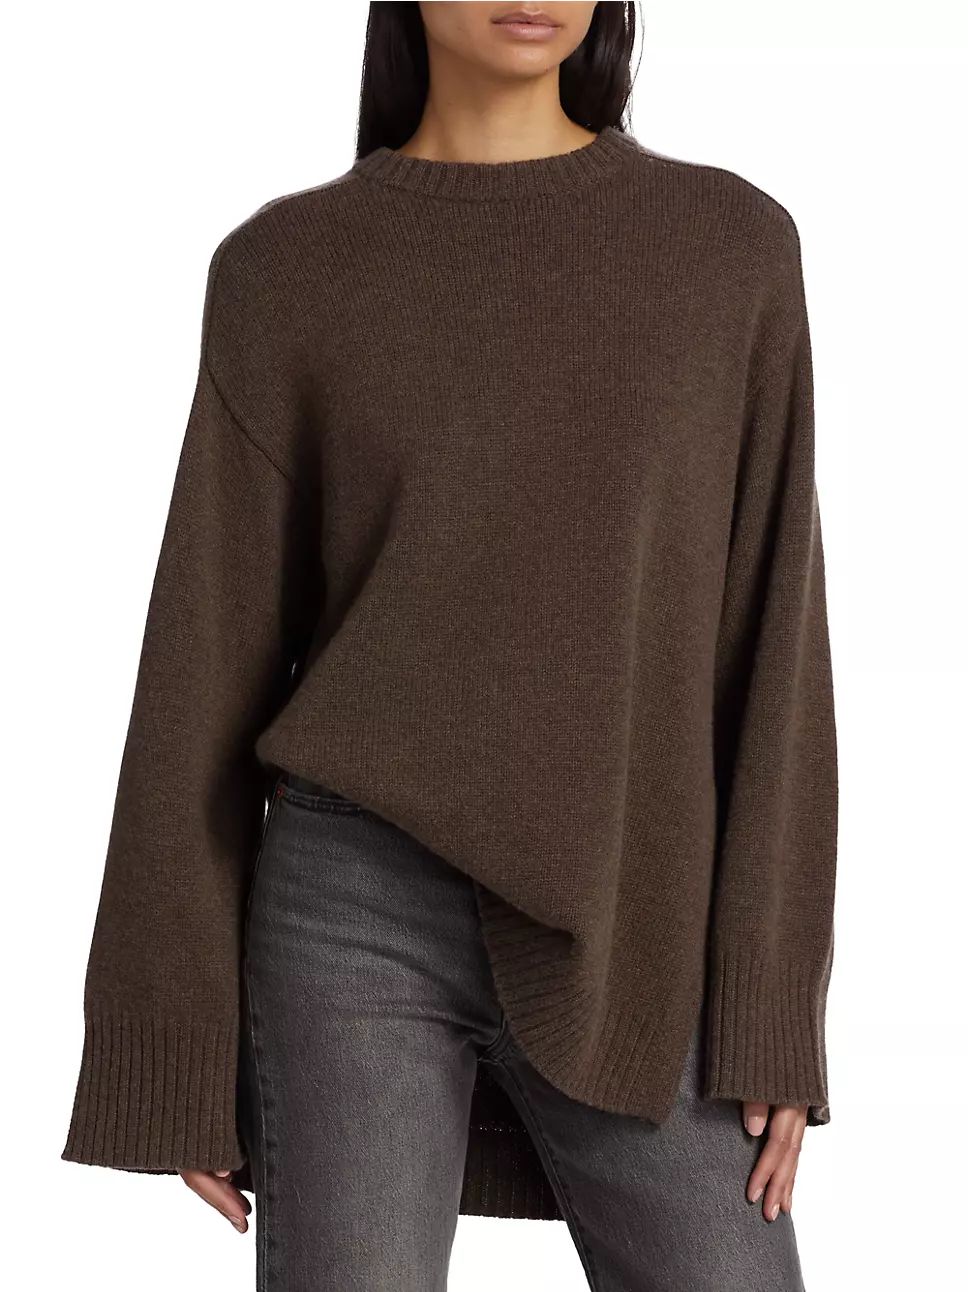 Safi Wool-Cashmere Blend Sweater | Saks Fifth Avenue